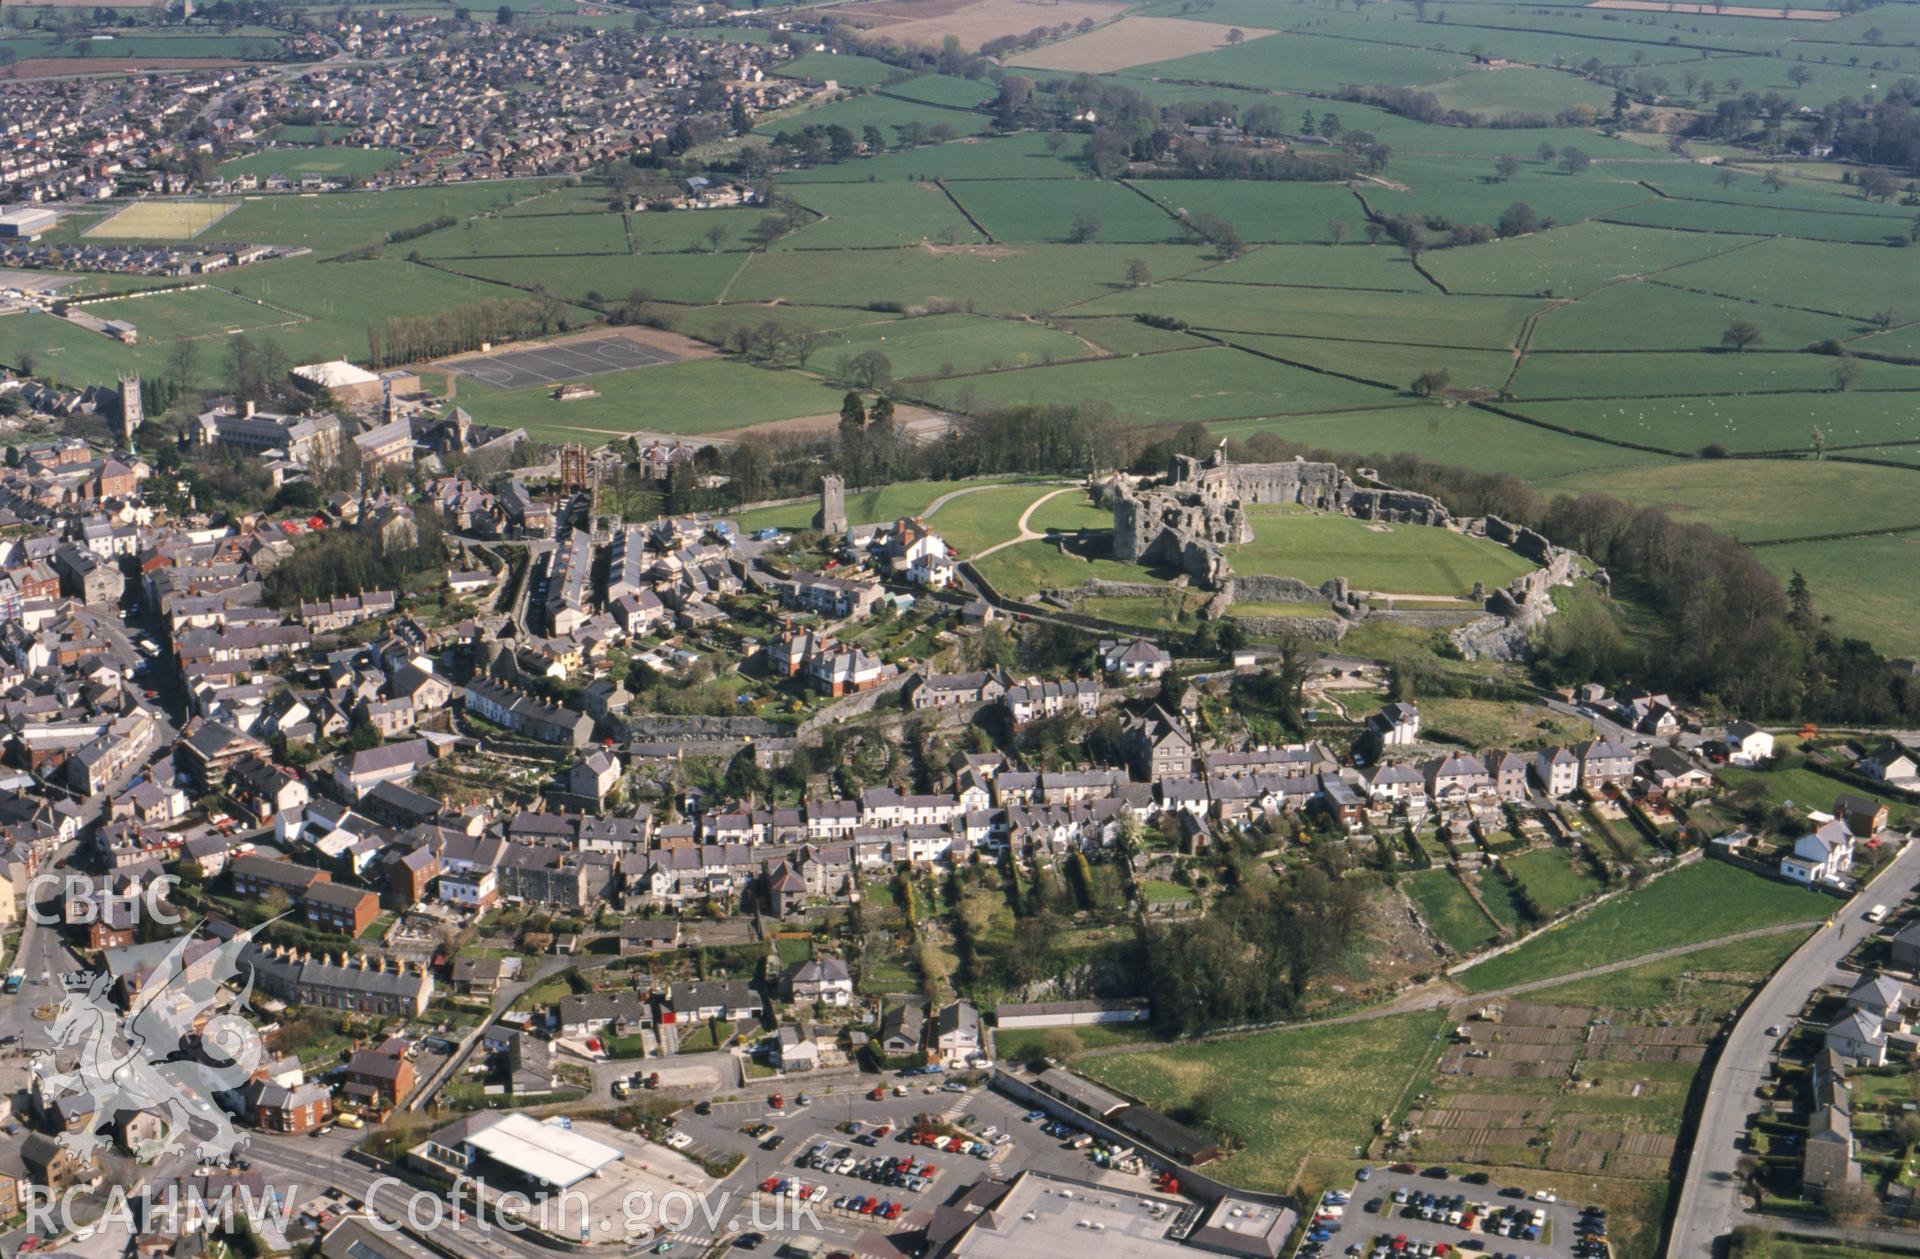 RCAHMW colour oblique aerial photograph of Denbigh, townscape with castle, from northwest. Taken by Toby Driver on 08/04/2003